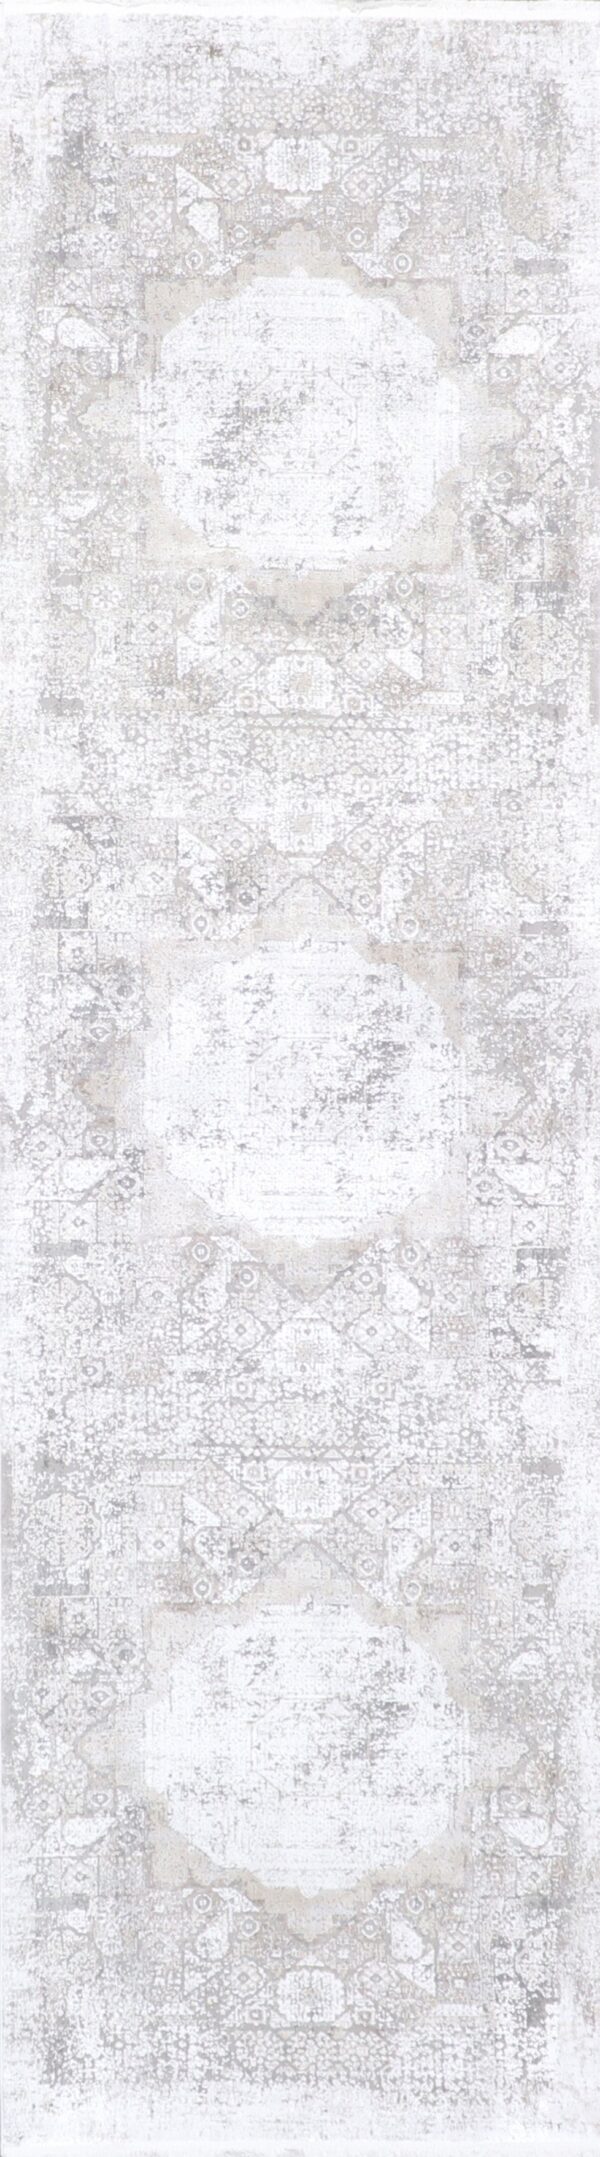 2’7”x10’ Transitional Gray Wool & Silk Hand-Finished Rug - Direct Rug Import | Rugs in Chicago, Indiana,South Bend,Granger